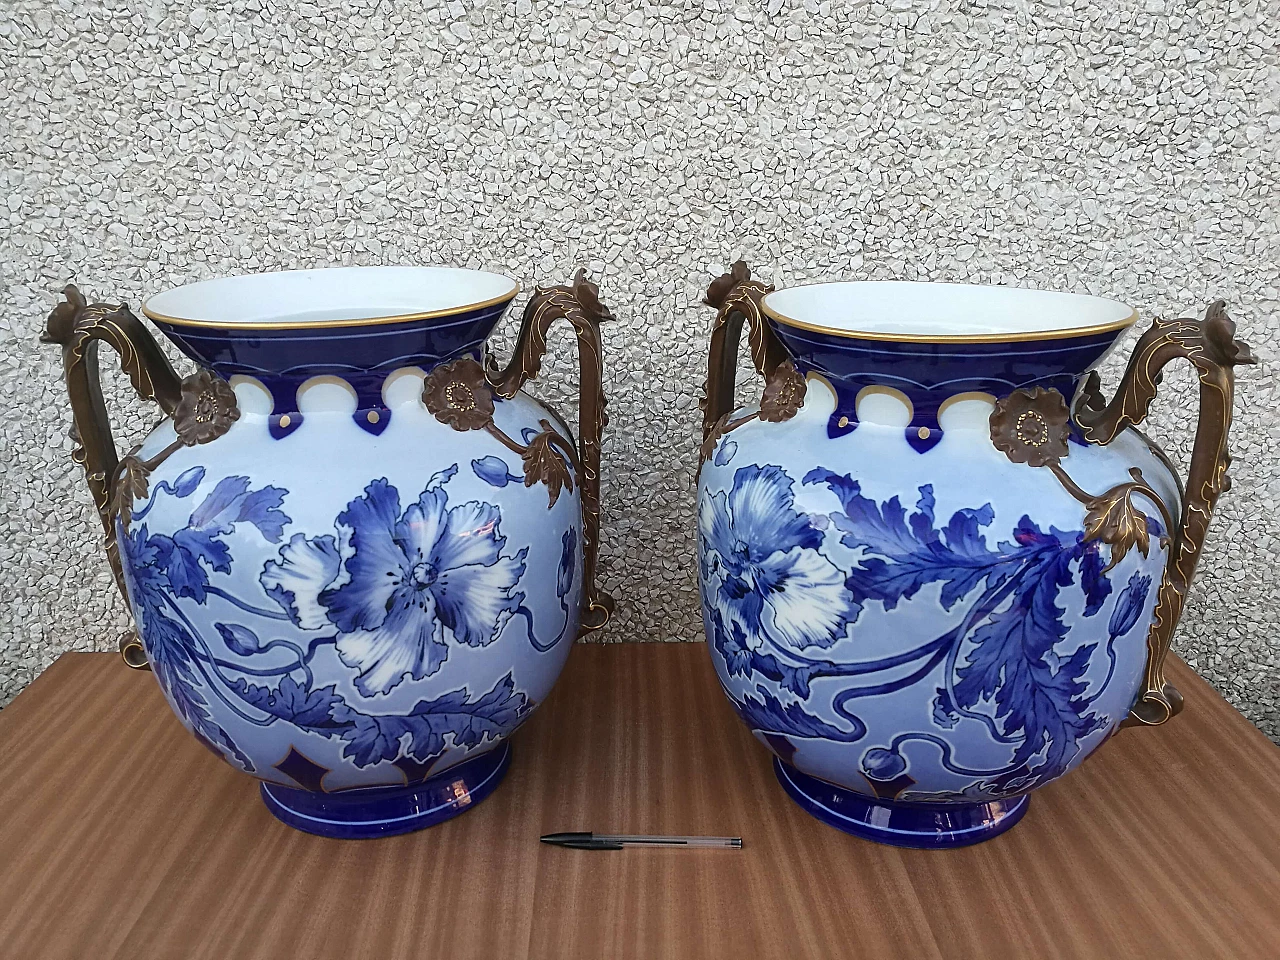 Pair of Jugendstil vases by Fischer & Mieg for Pirkenhammer, early 20th century 1251902